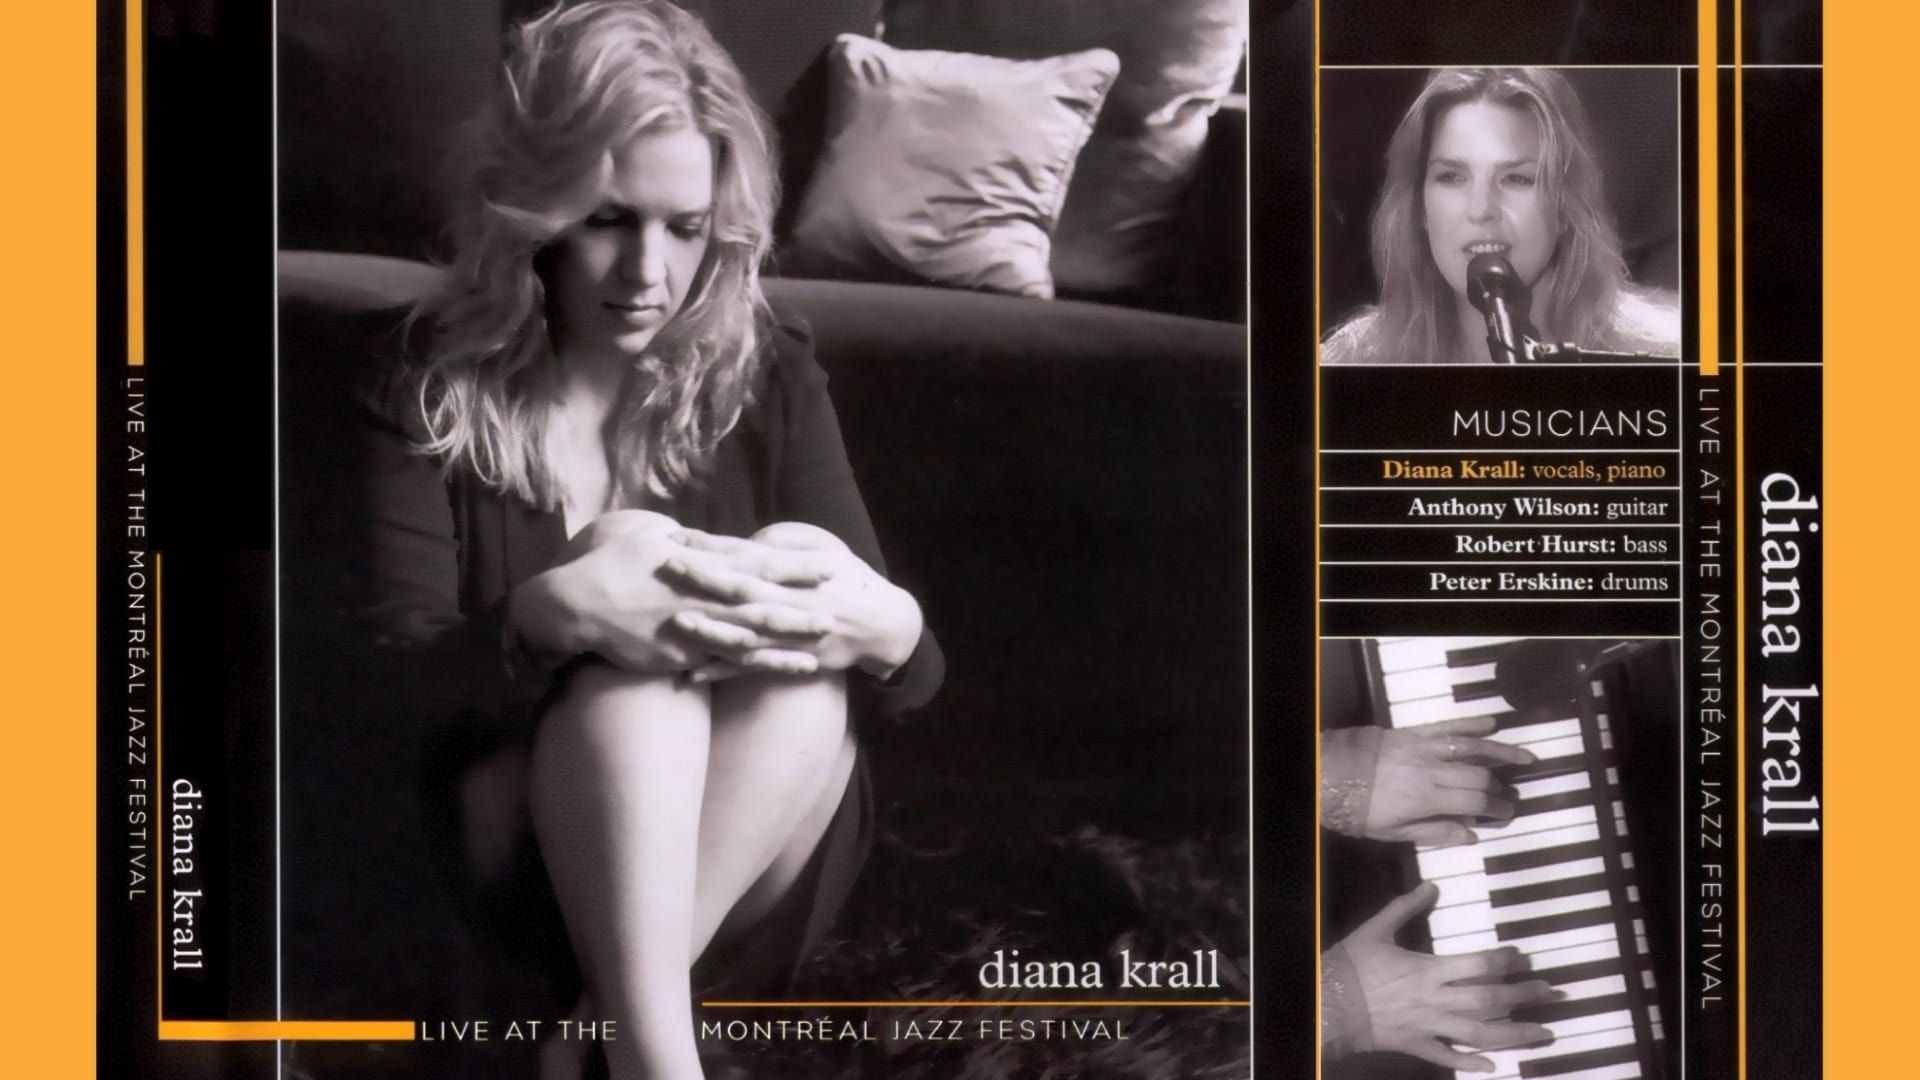 Diana Krall: Live at the Montreal Jazz Festival background